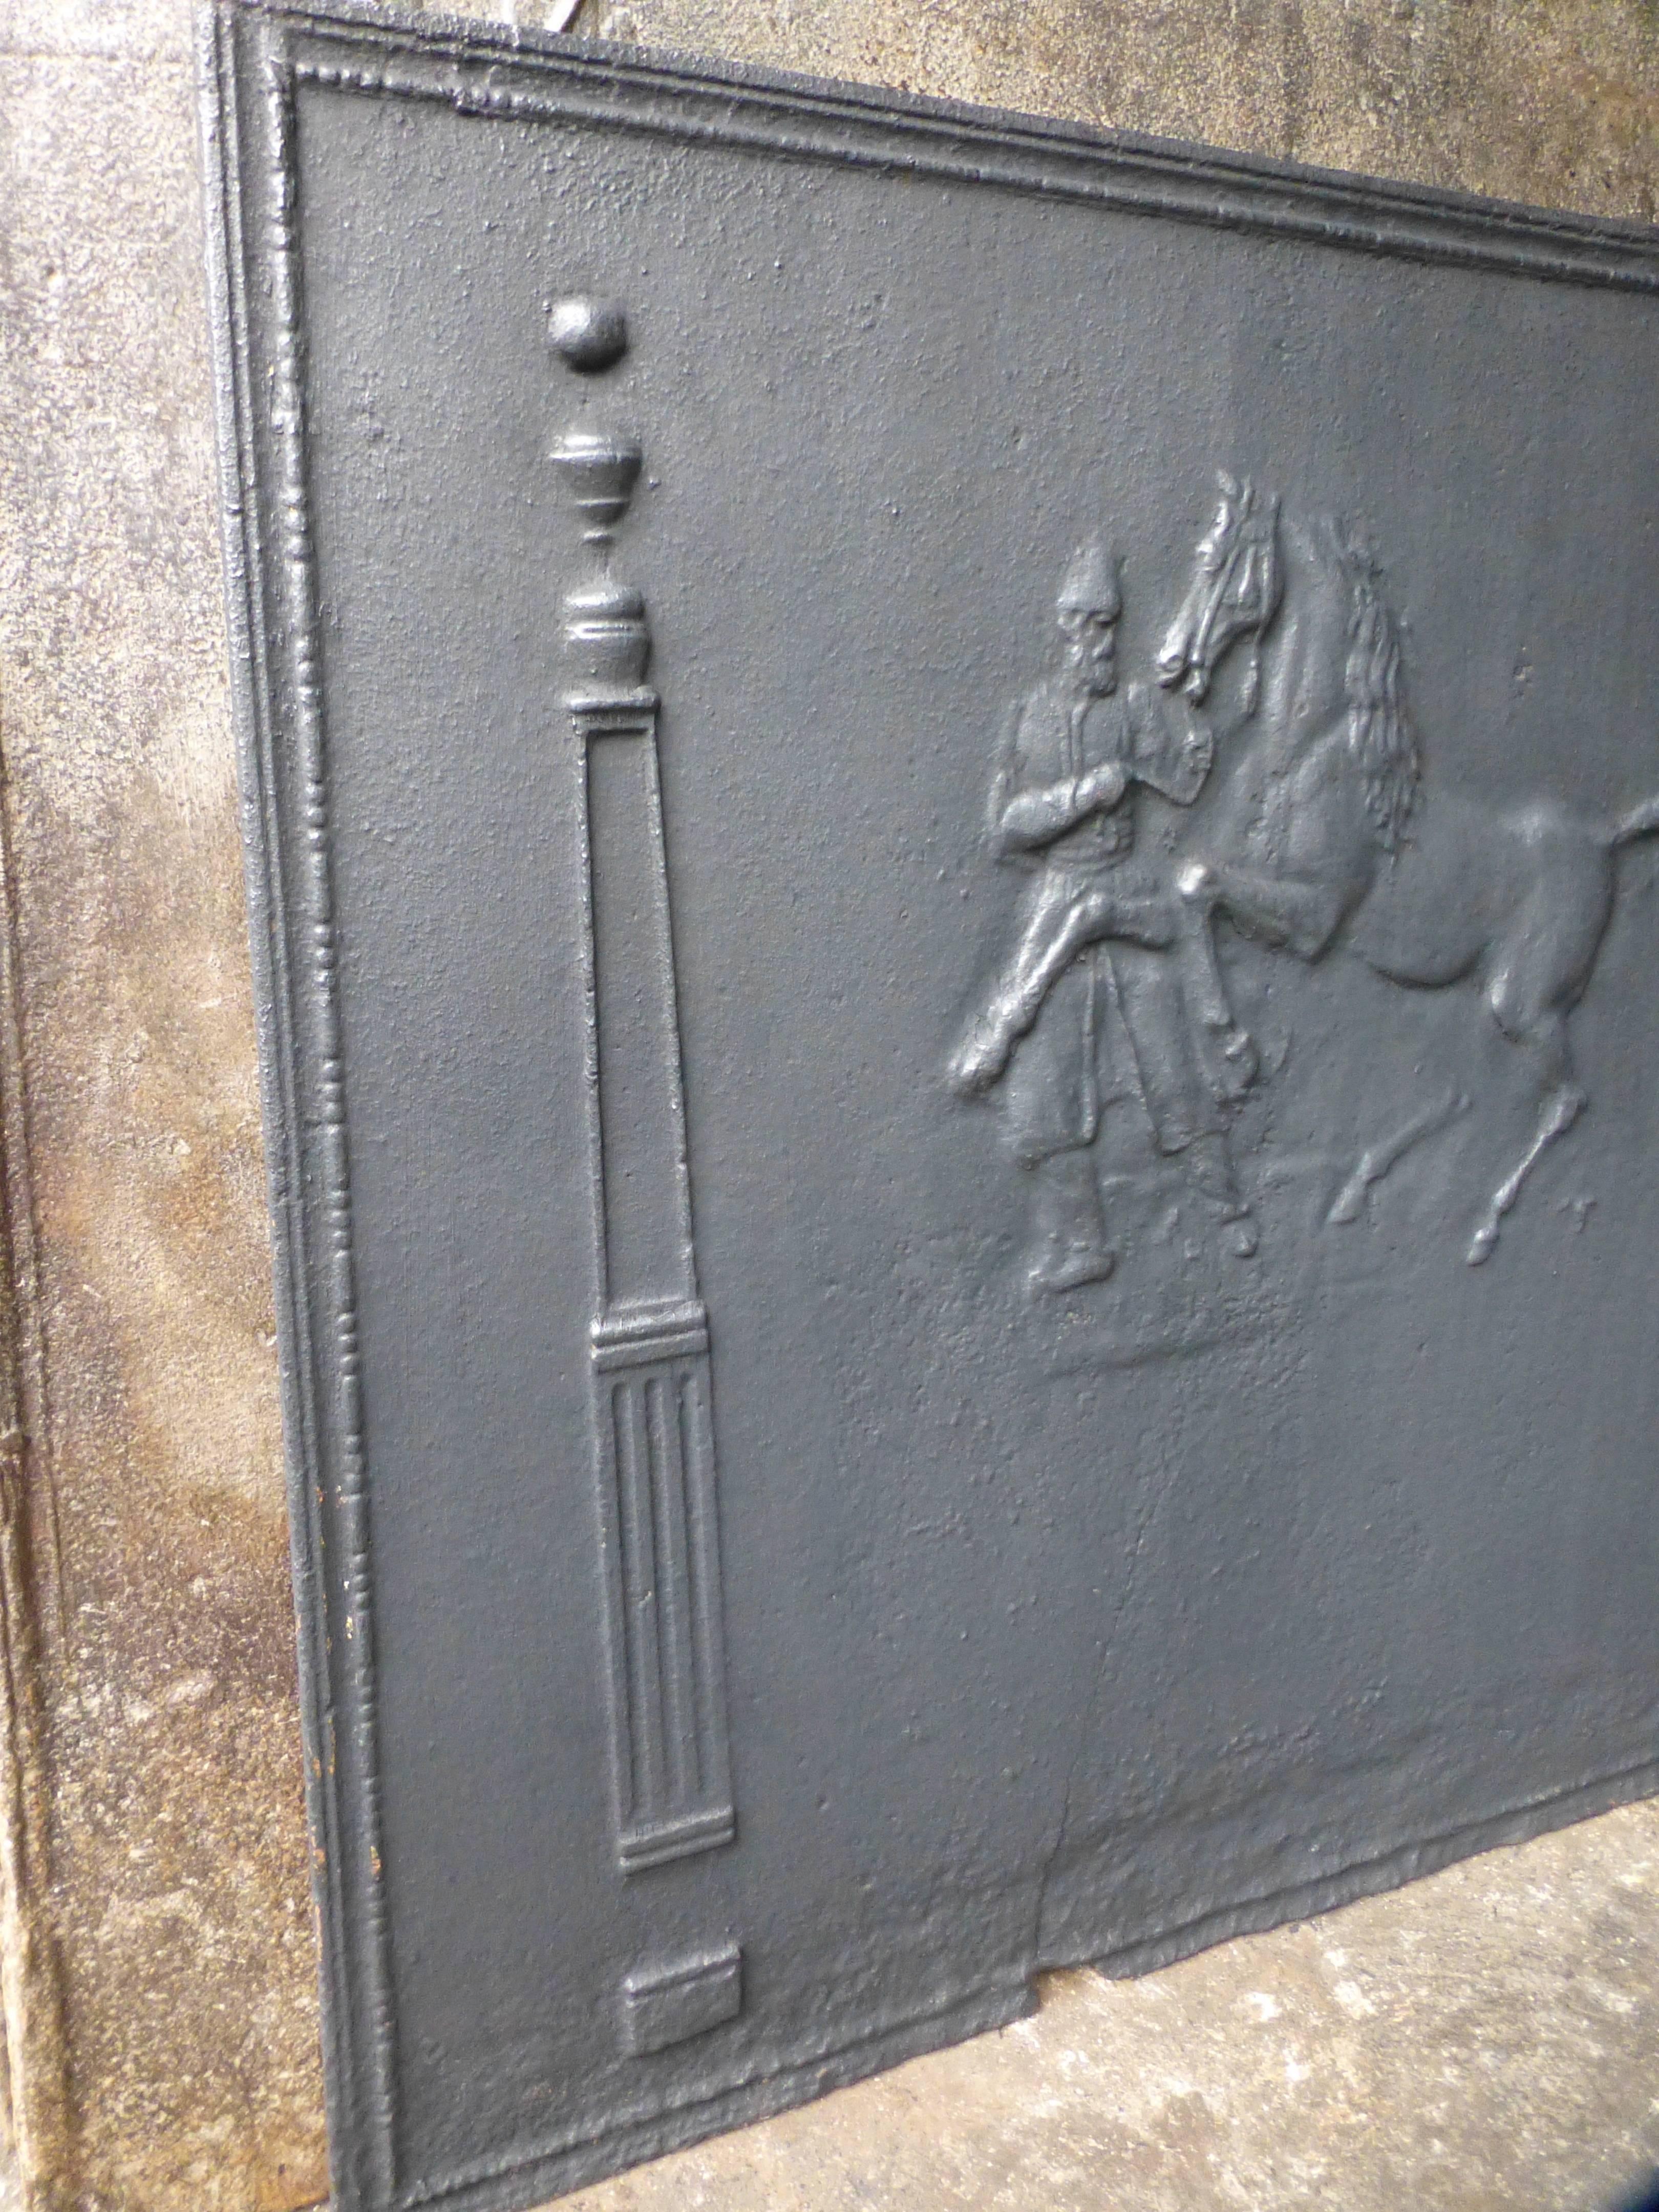 19th century French cast iron fire back with horseman, horse and pillars.

We always have 500+ antique firebacks in stock in all styles and dimensions that can be ordered on line. See our website for our current stock and prices.